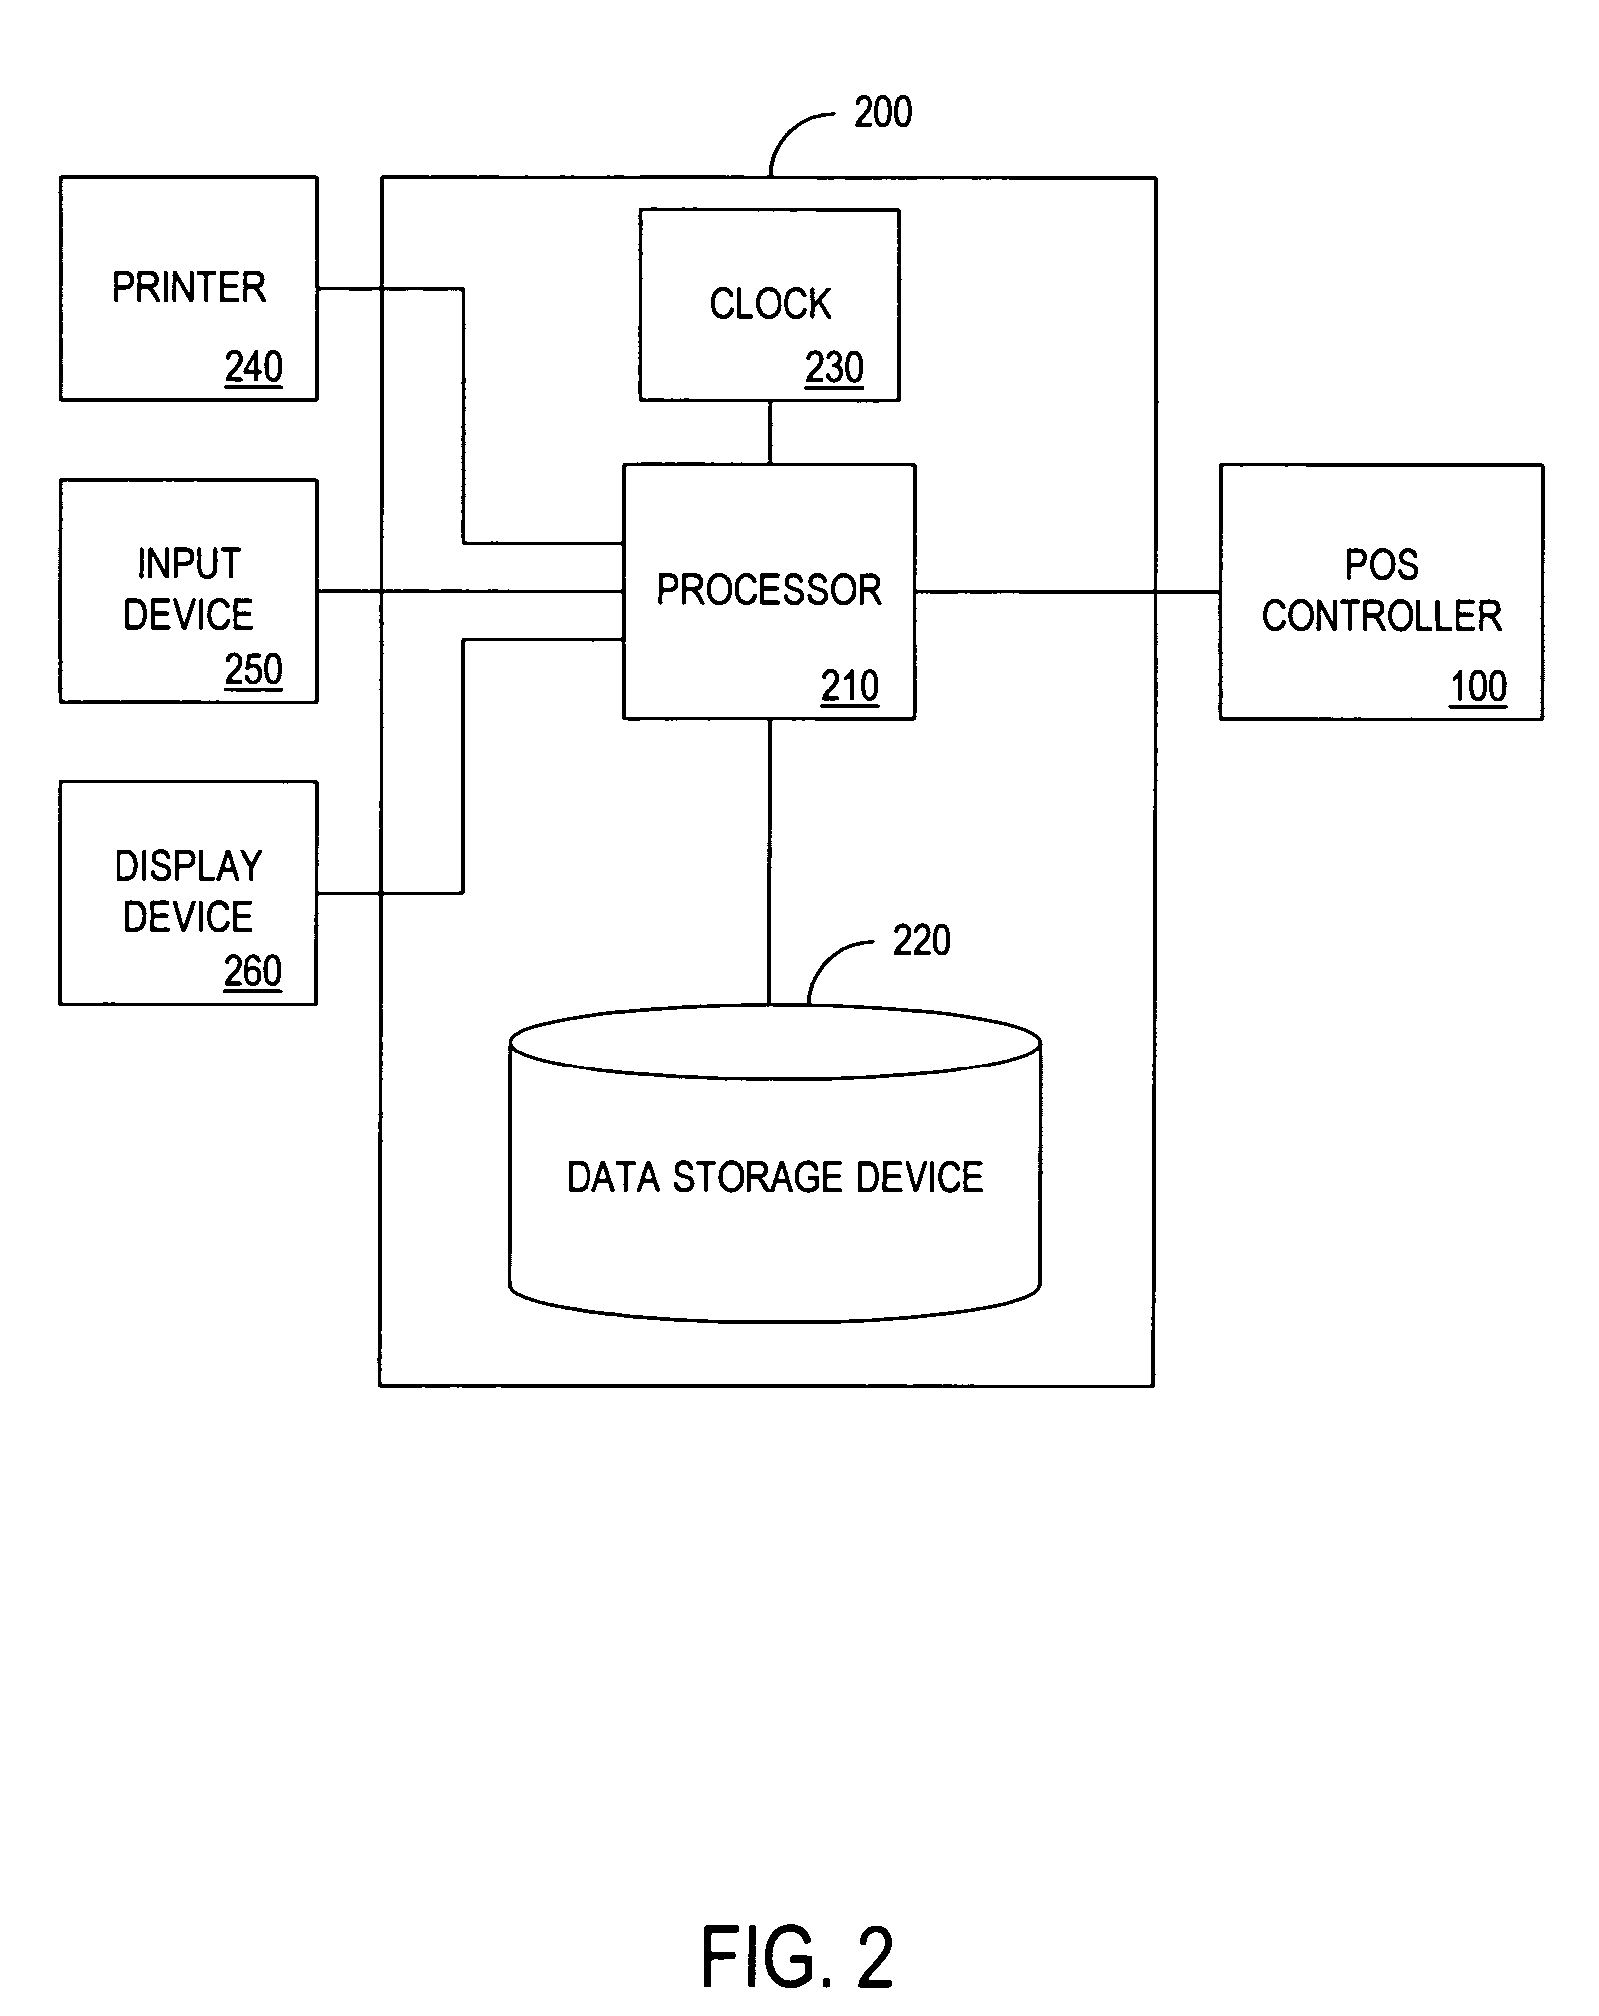 Method and apparatus for determining a progressive discount for a customer based on the frequency of the customer's transactions